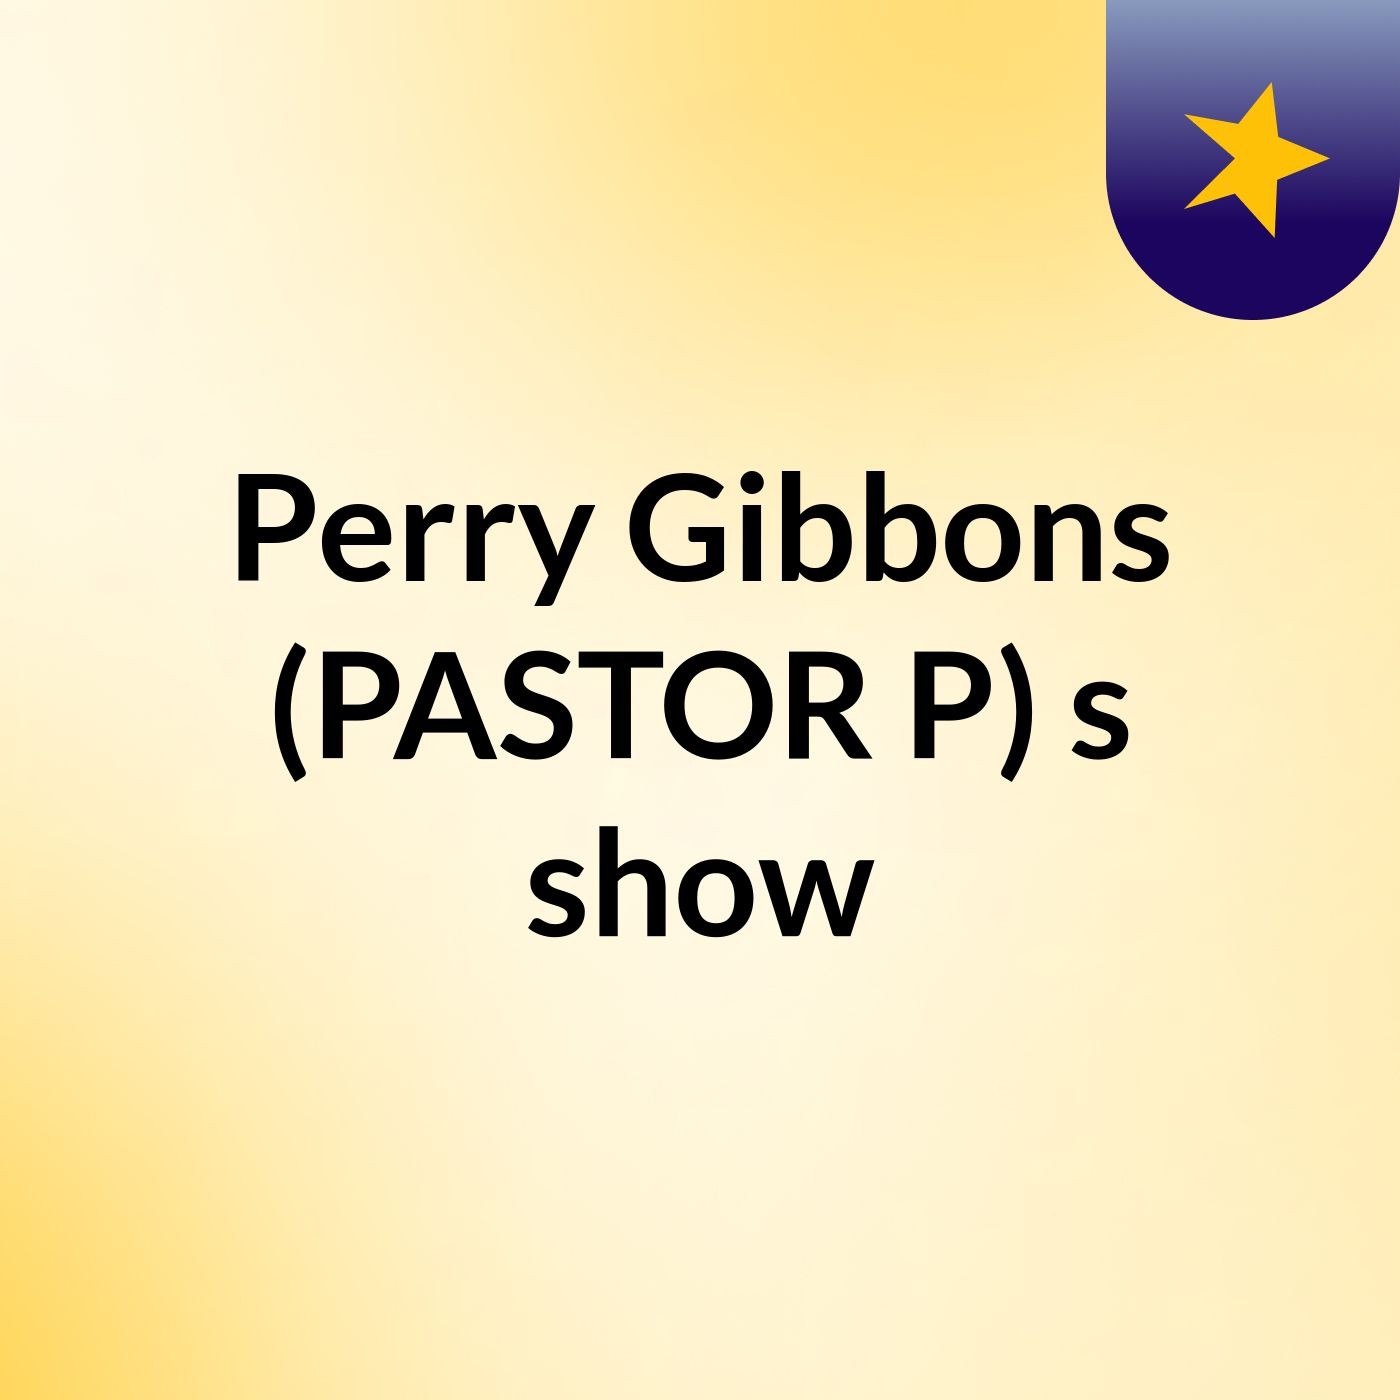 Perry Gibbons  (PASTOR P)'s show